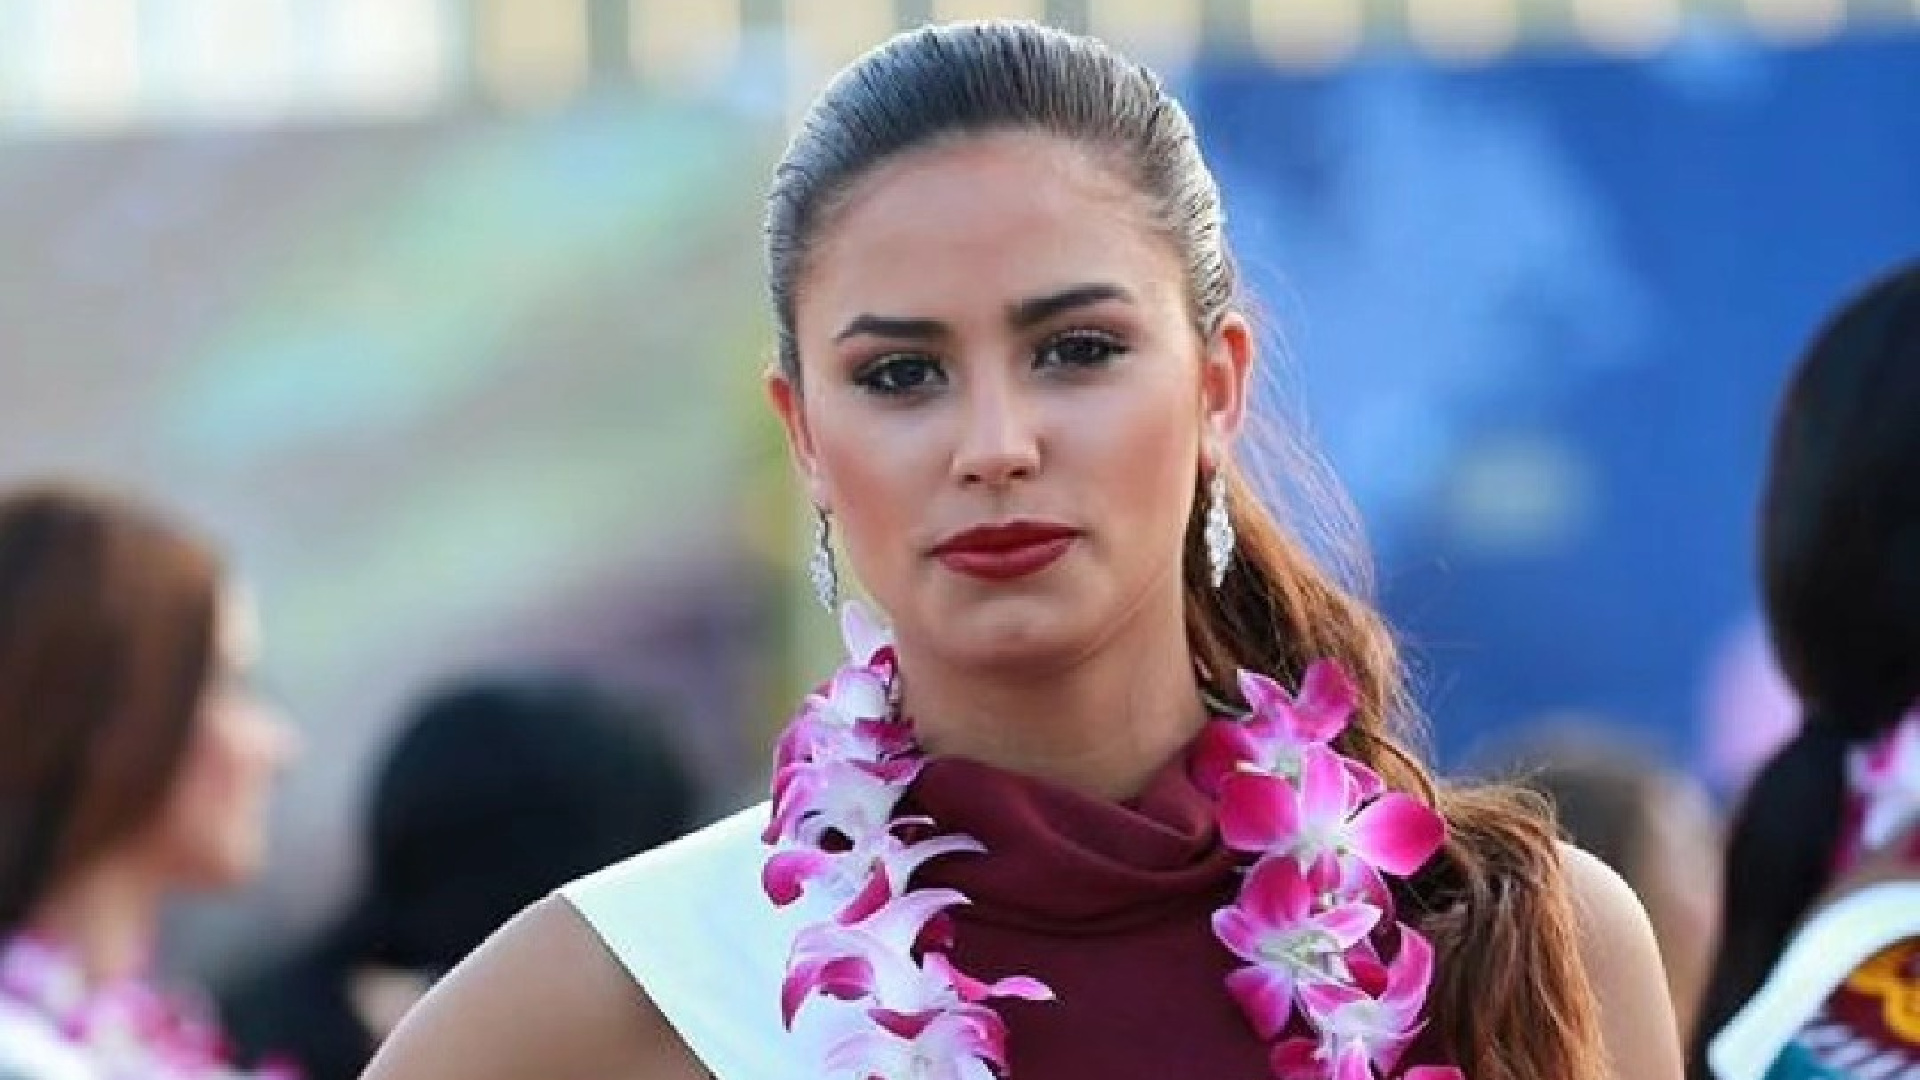 Sherika de Armas, Miss Uruguay and Miss World candidate, dies at 26